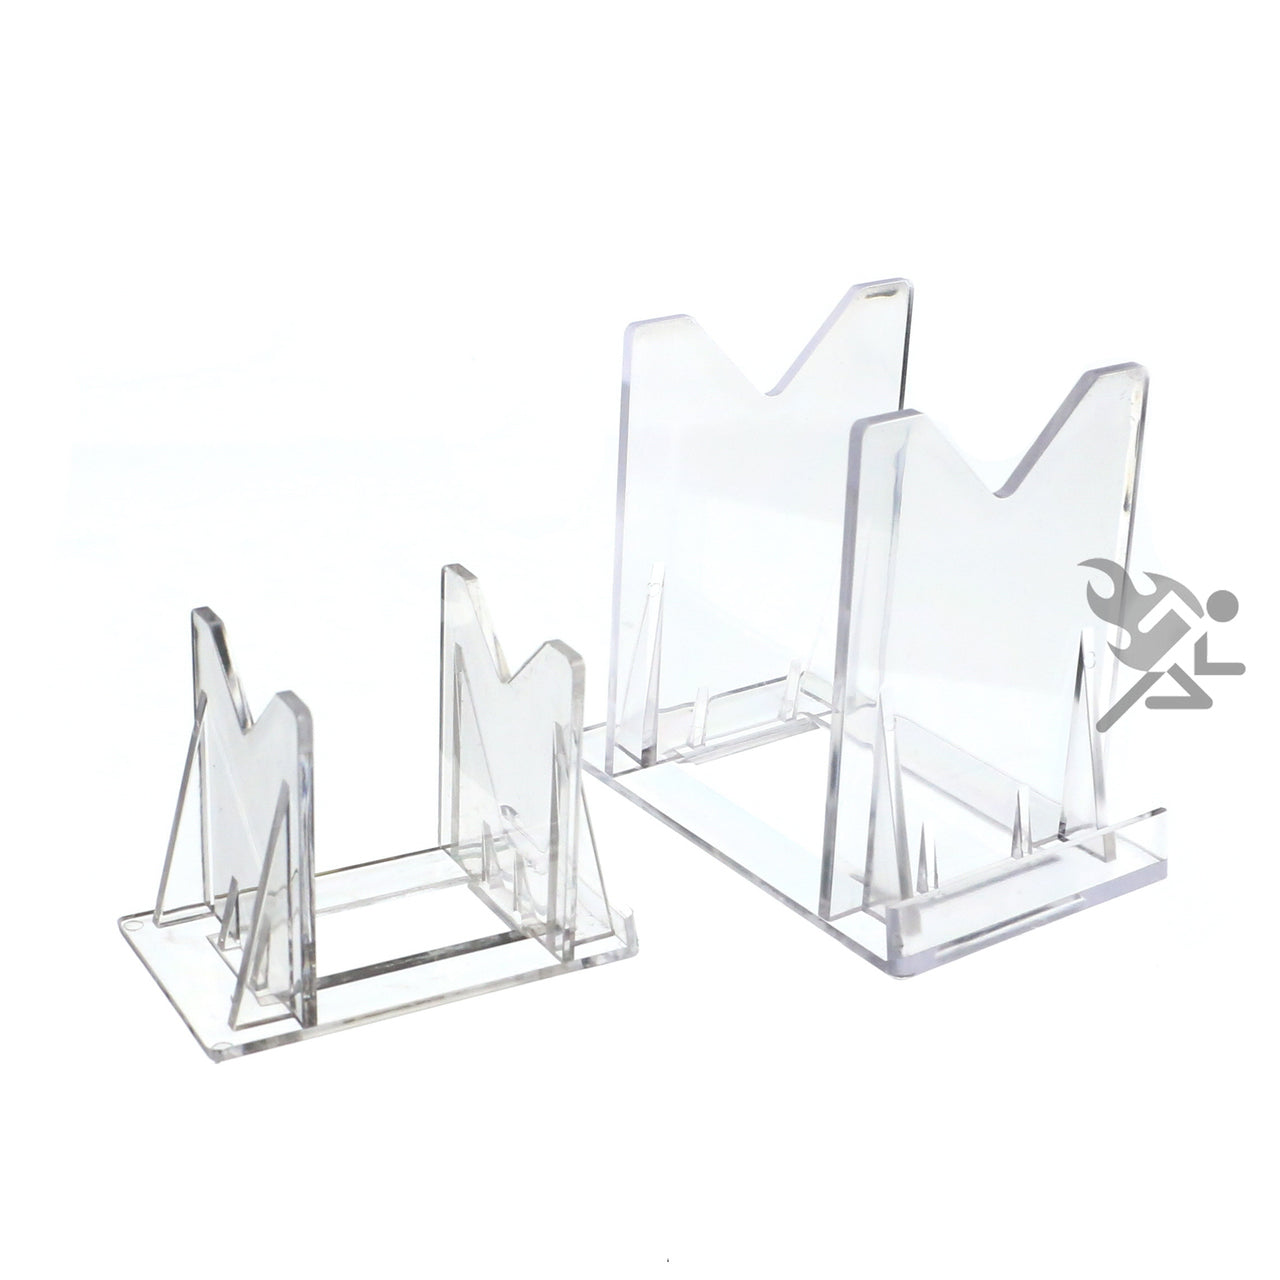 CATSELURRY Fishing Lure Display Holder Acrylic Fishing Lure Display Stands  Clear Large Fishing Lures Easels for Baits Lure Display : : Sports  & Outdoors